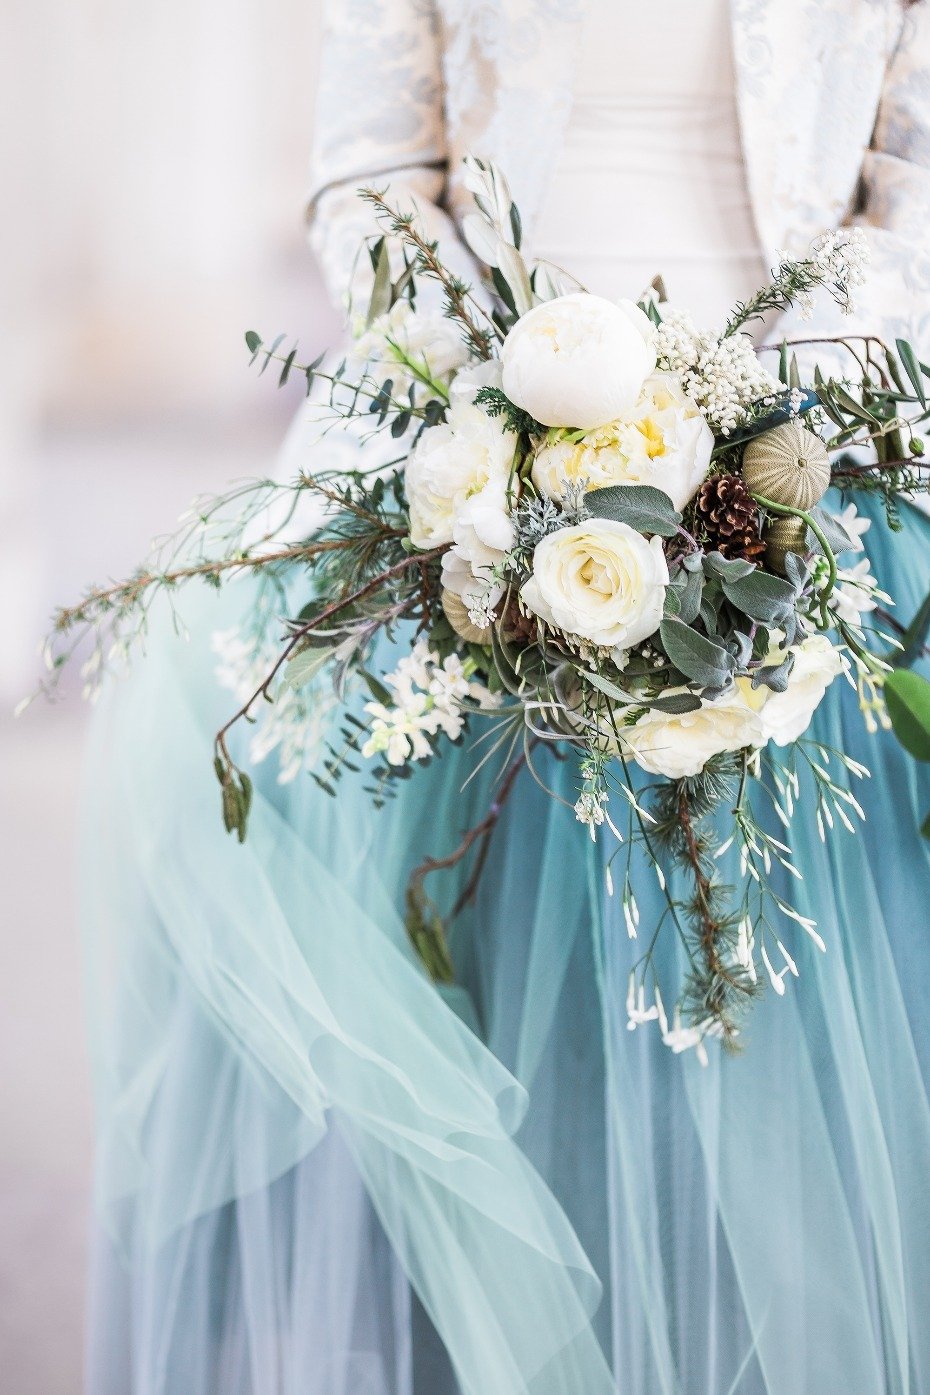 Gorgeous bouquet and blue tulle skirt